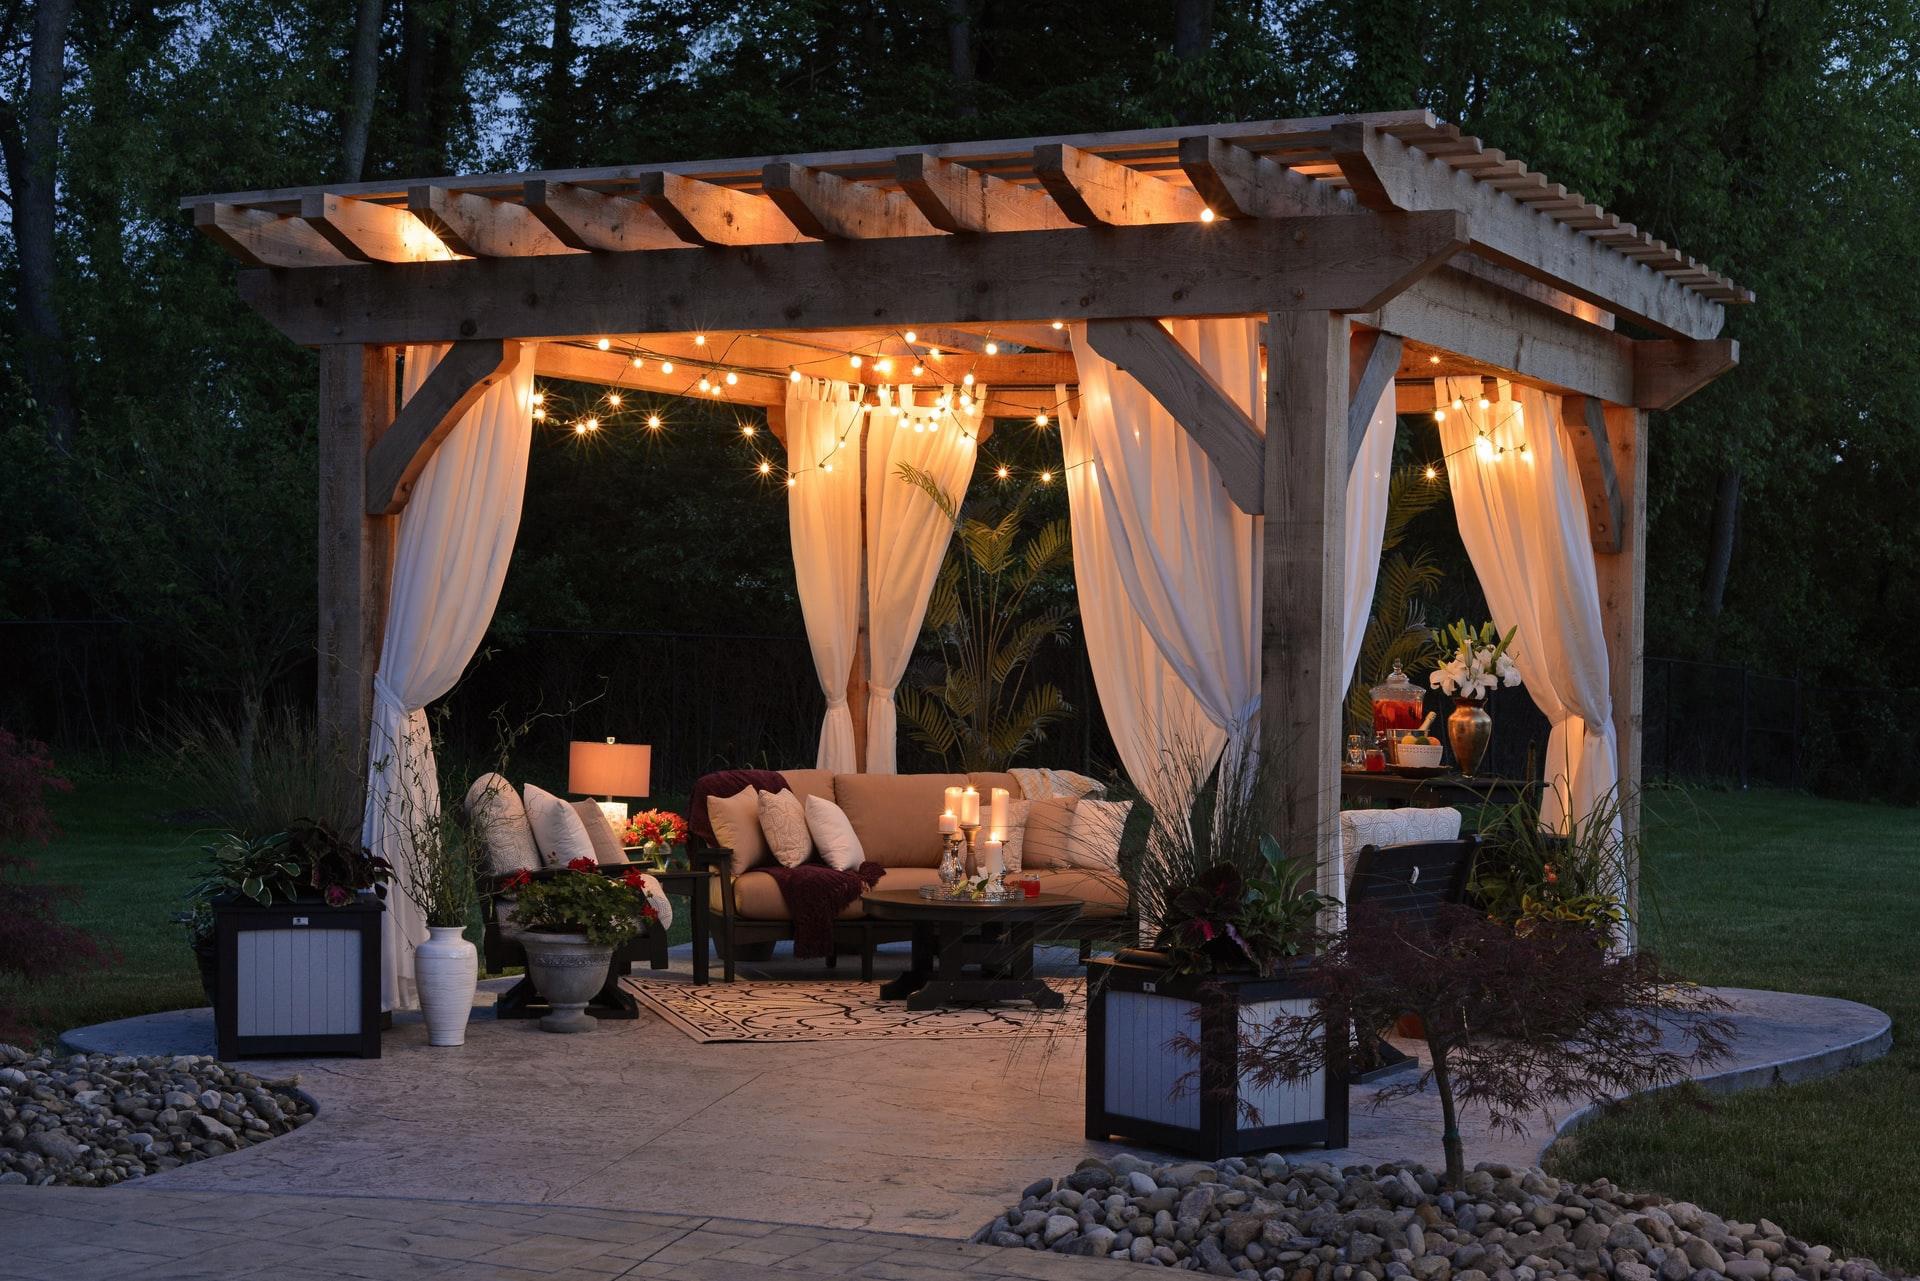 5 Outdoor Lighting Ideas for Your Yard to Create a Relaxing Atmosphere -  Rustica House ®